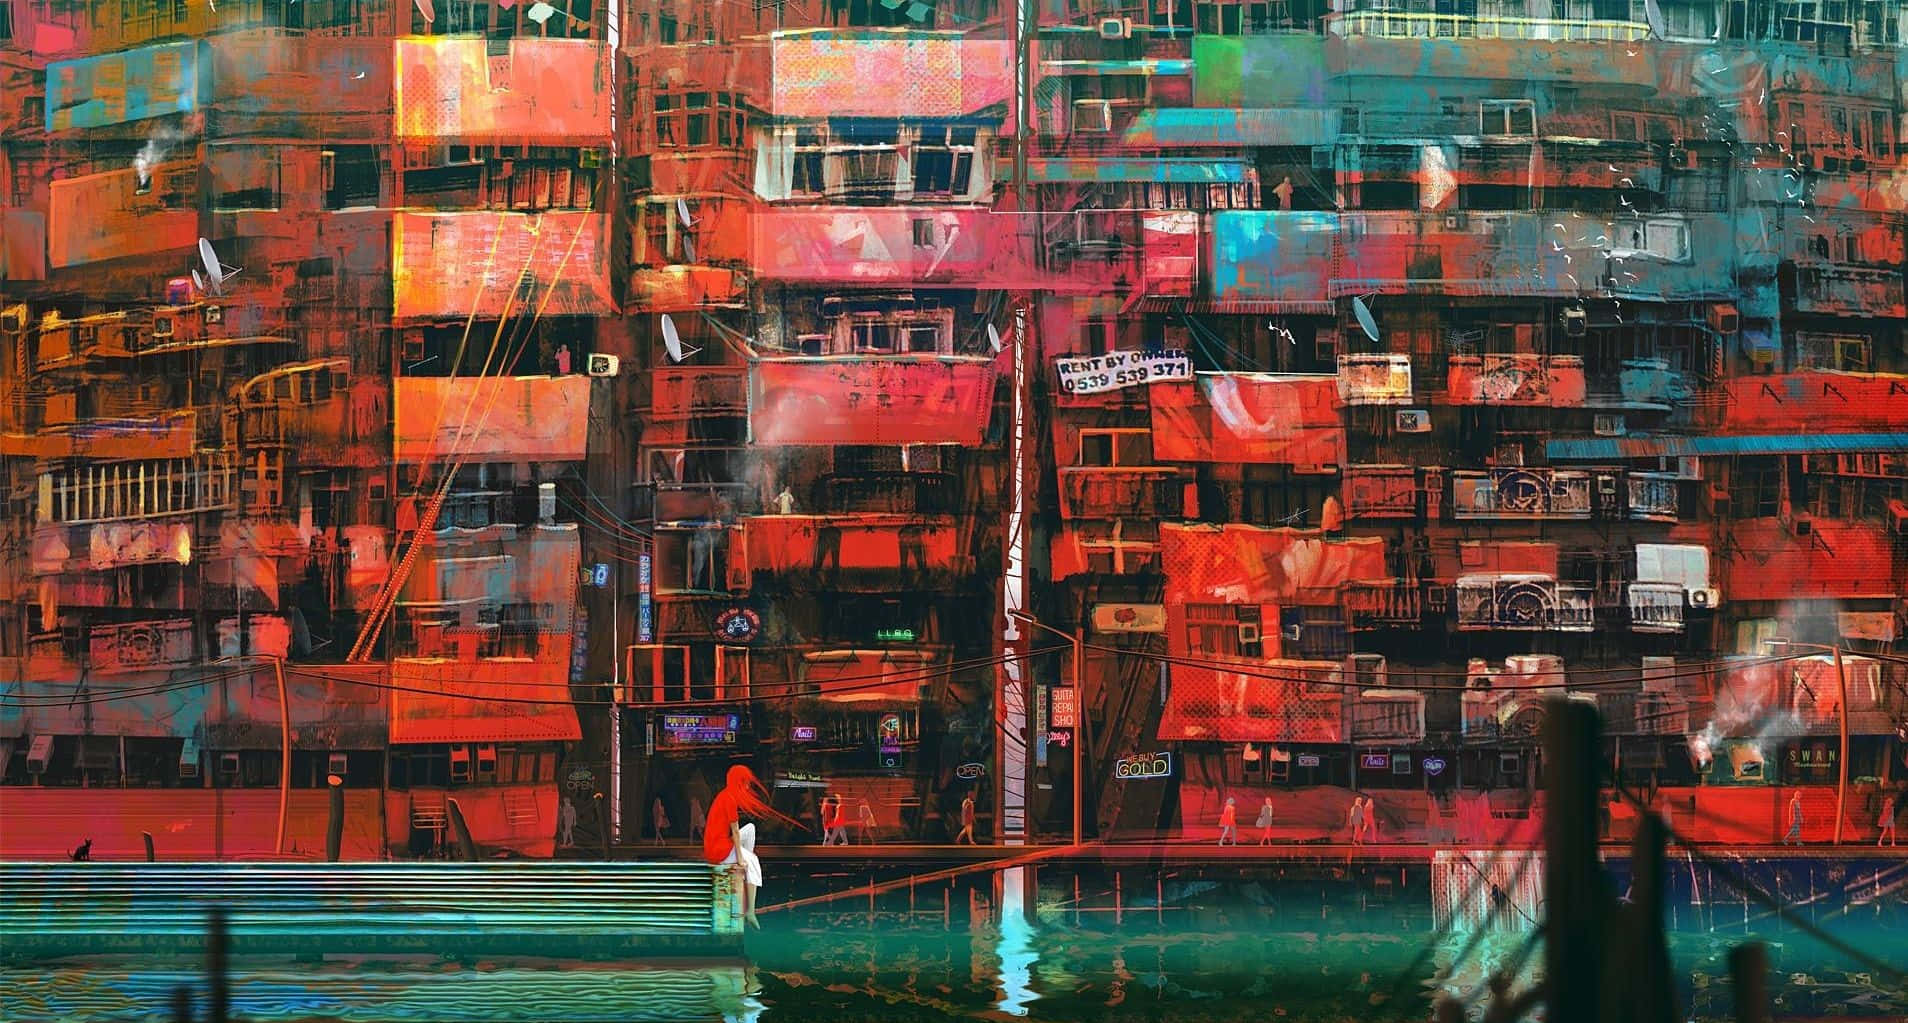 En glitched ud Kowloon Walled City i Tokyo Wallpaper